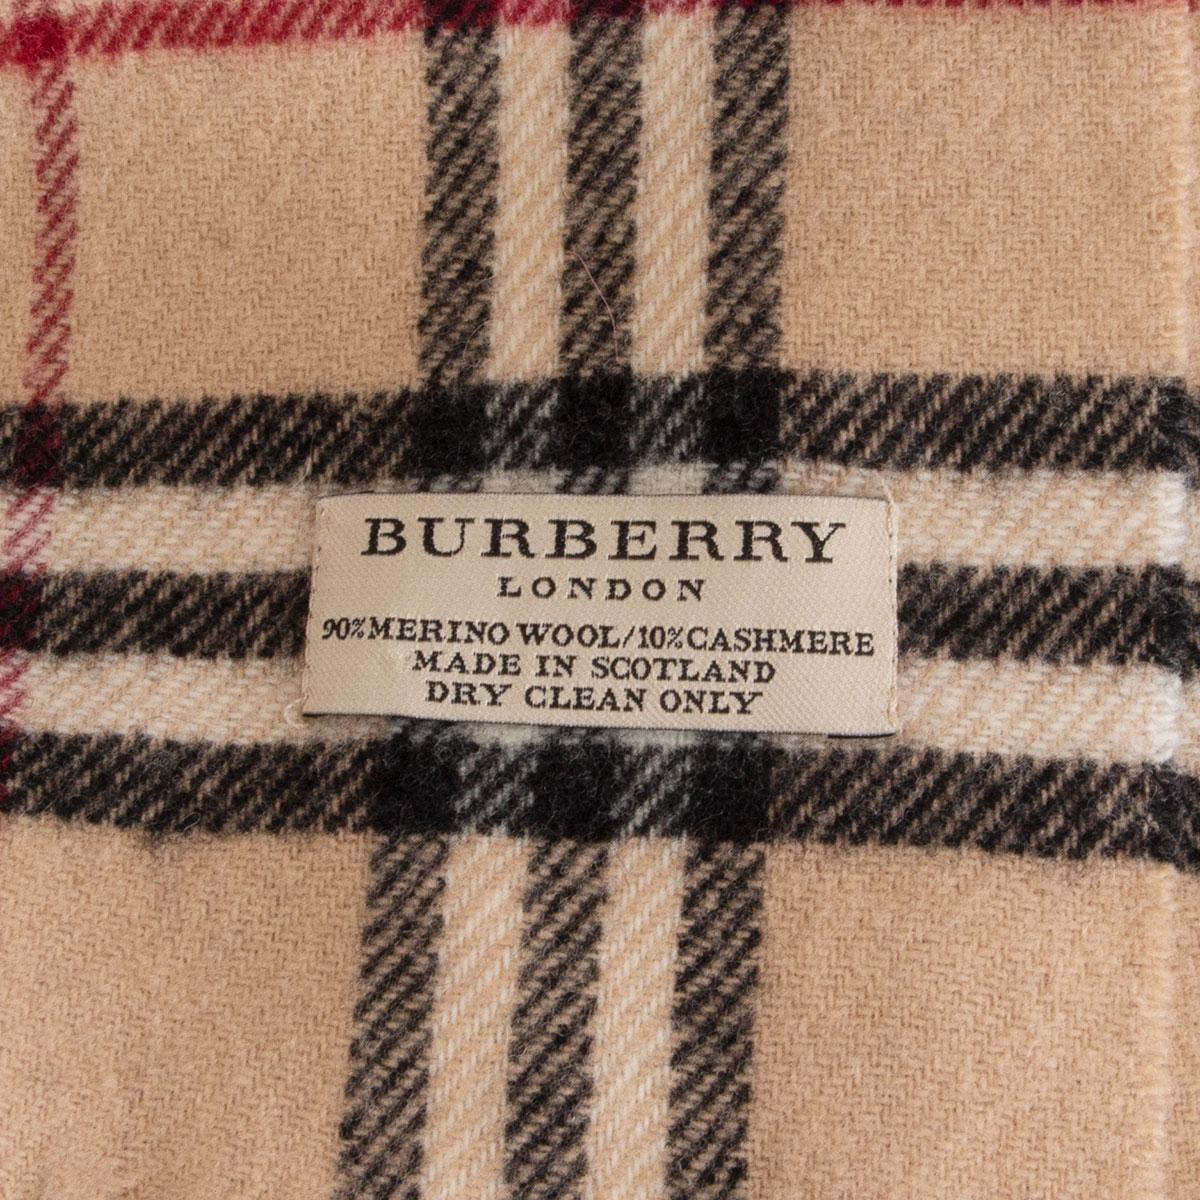 100% authentic Burberry London classic check shawl in beige, black, red and off-white merino (90%) and cashmere (10%). Has been worn and is in excellent condition. 

Measurements
Width	30.5cm (11.9in)
Length	134cm (52.3in)

All our listings include